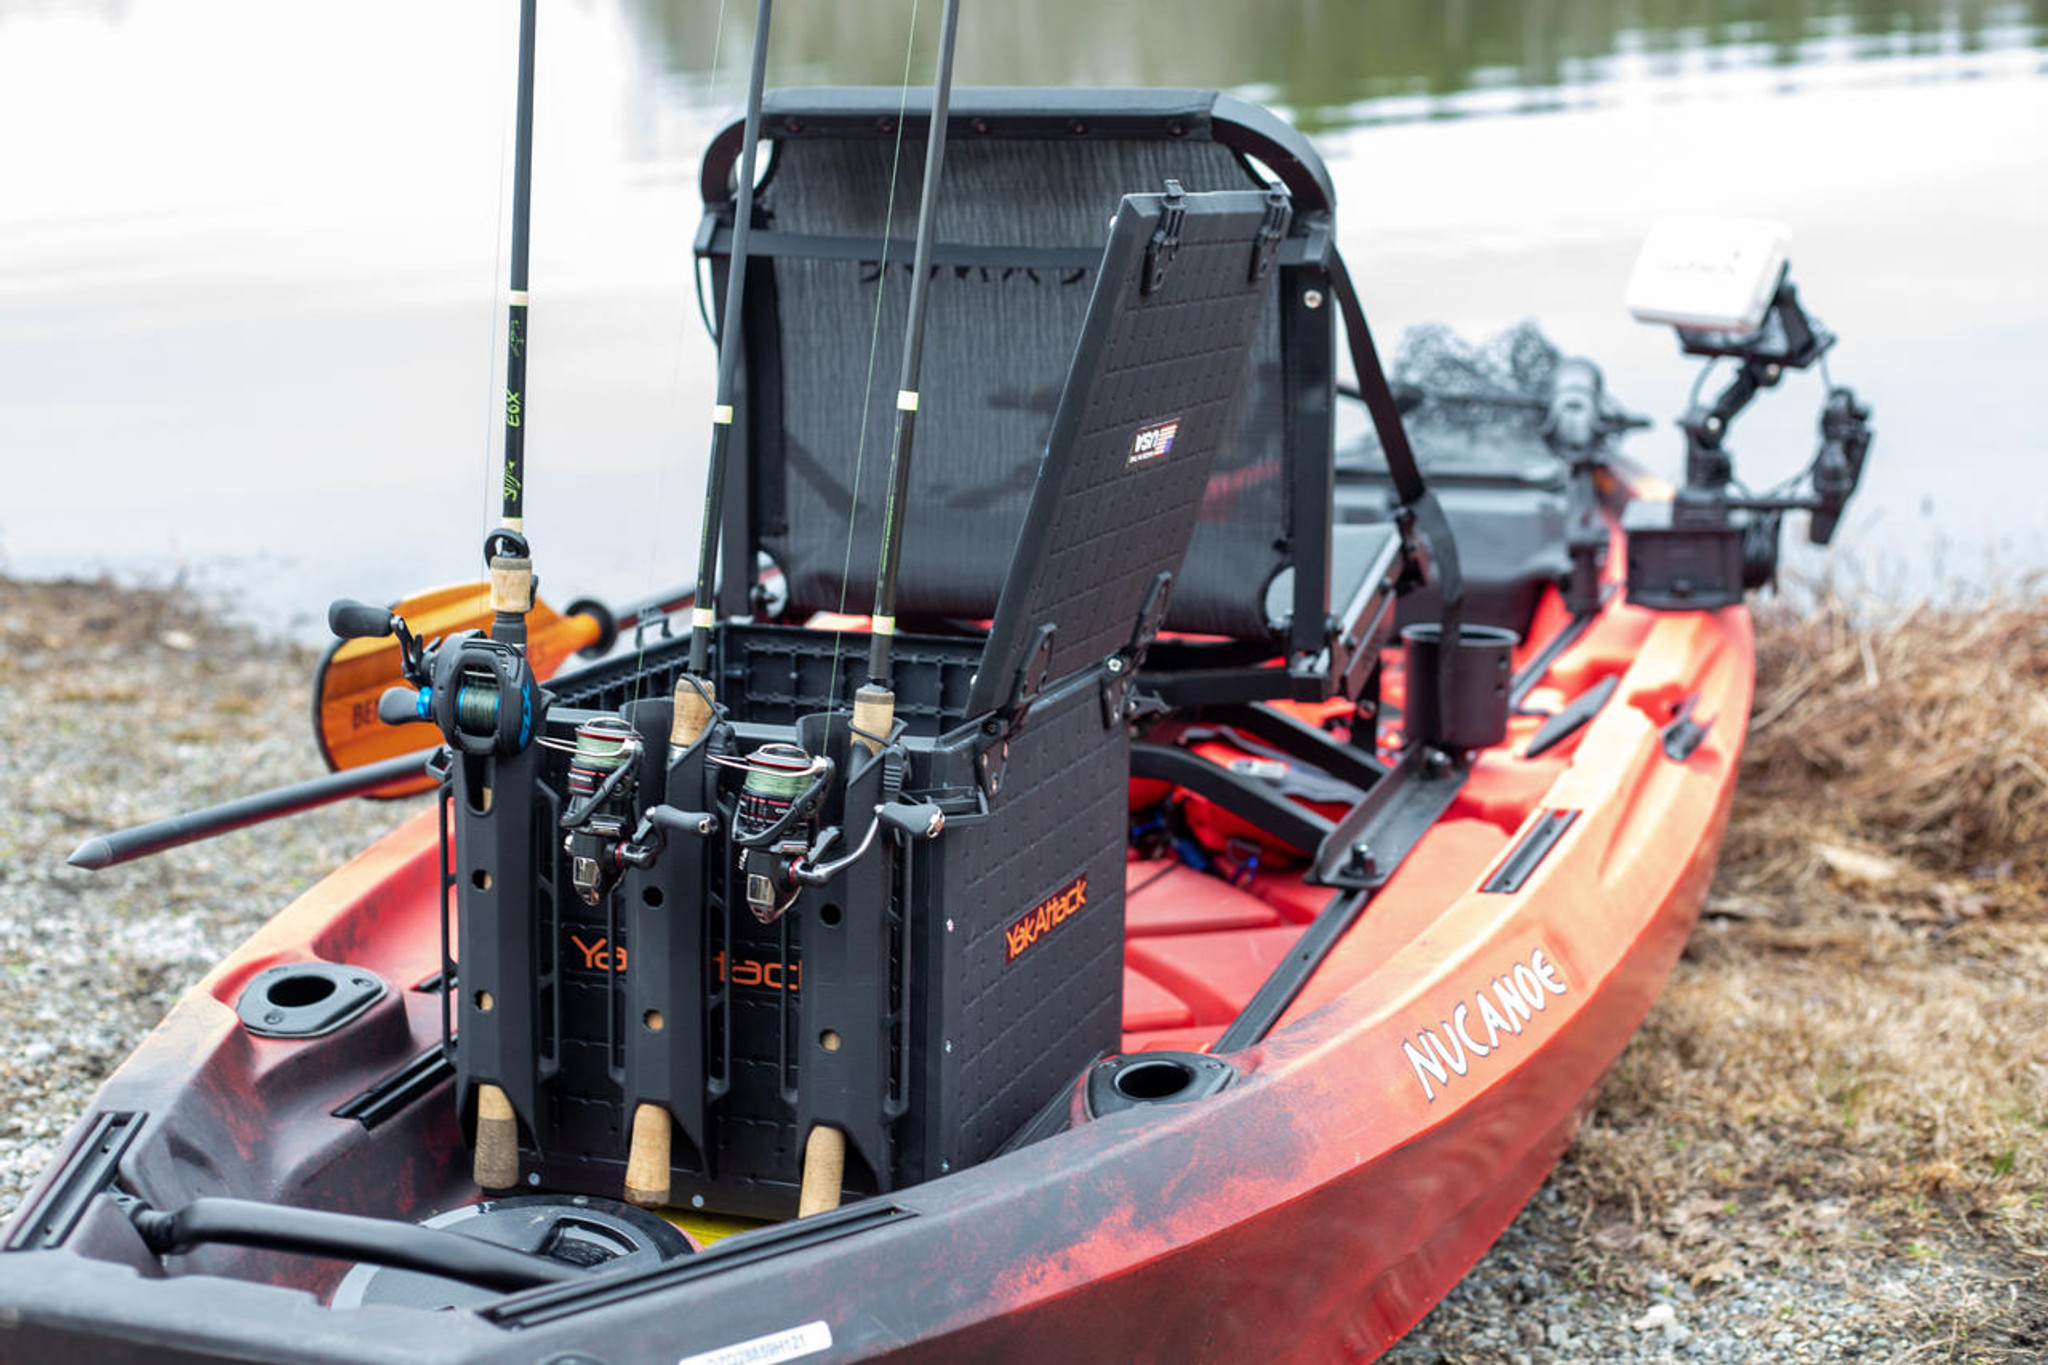 Blackpak Pro Kayak Fishing Crate - Multiple Colors and Sizes